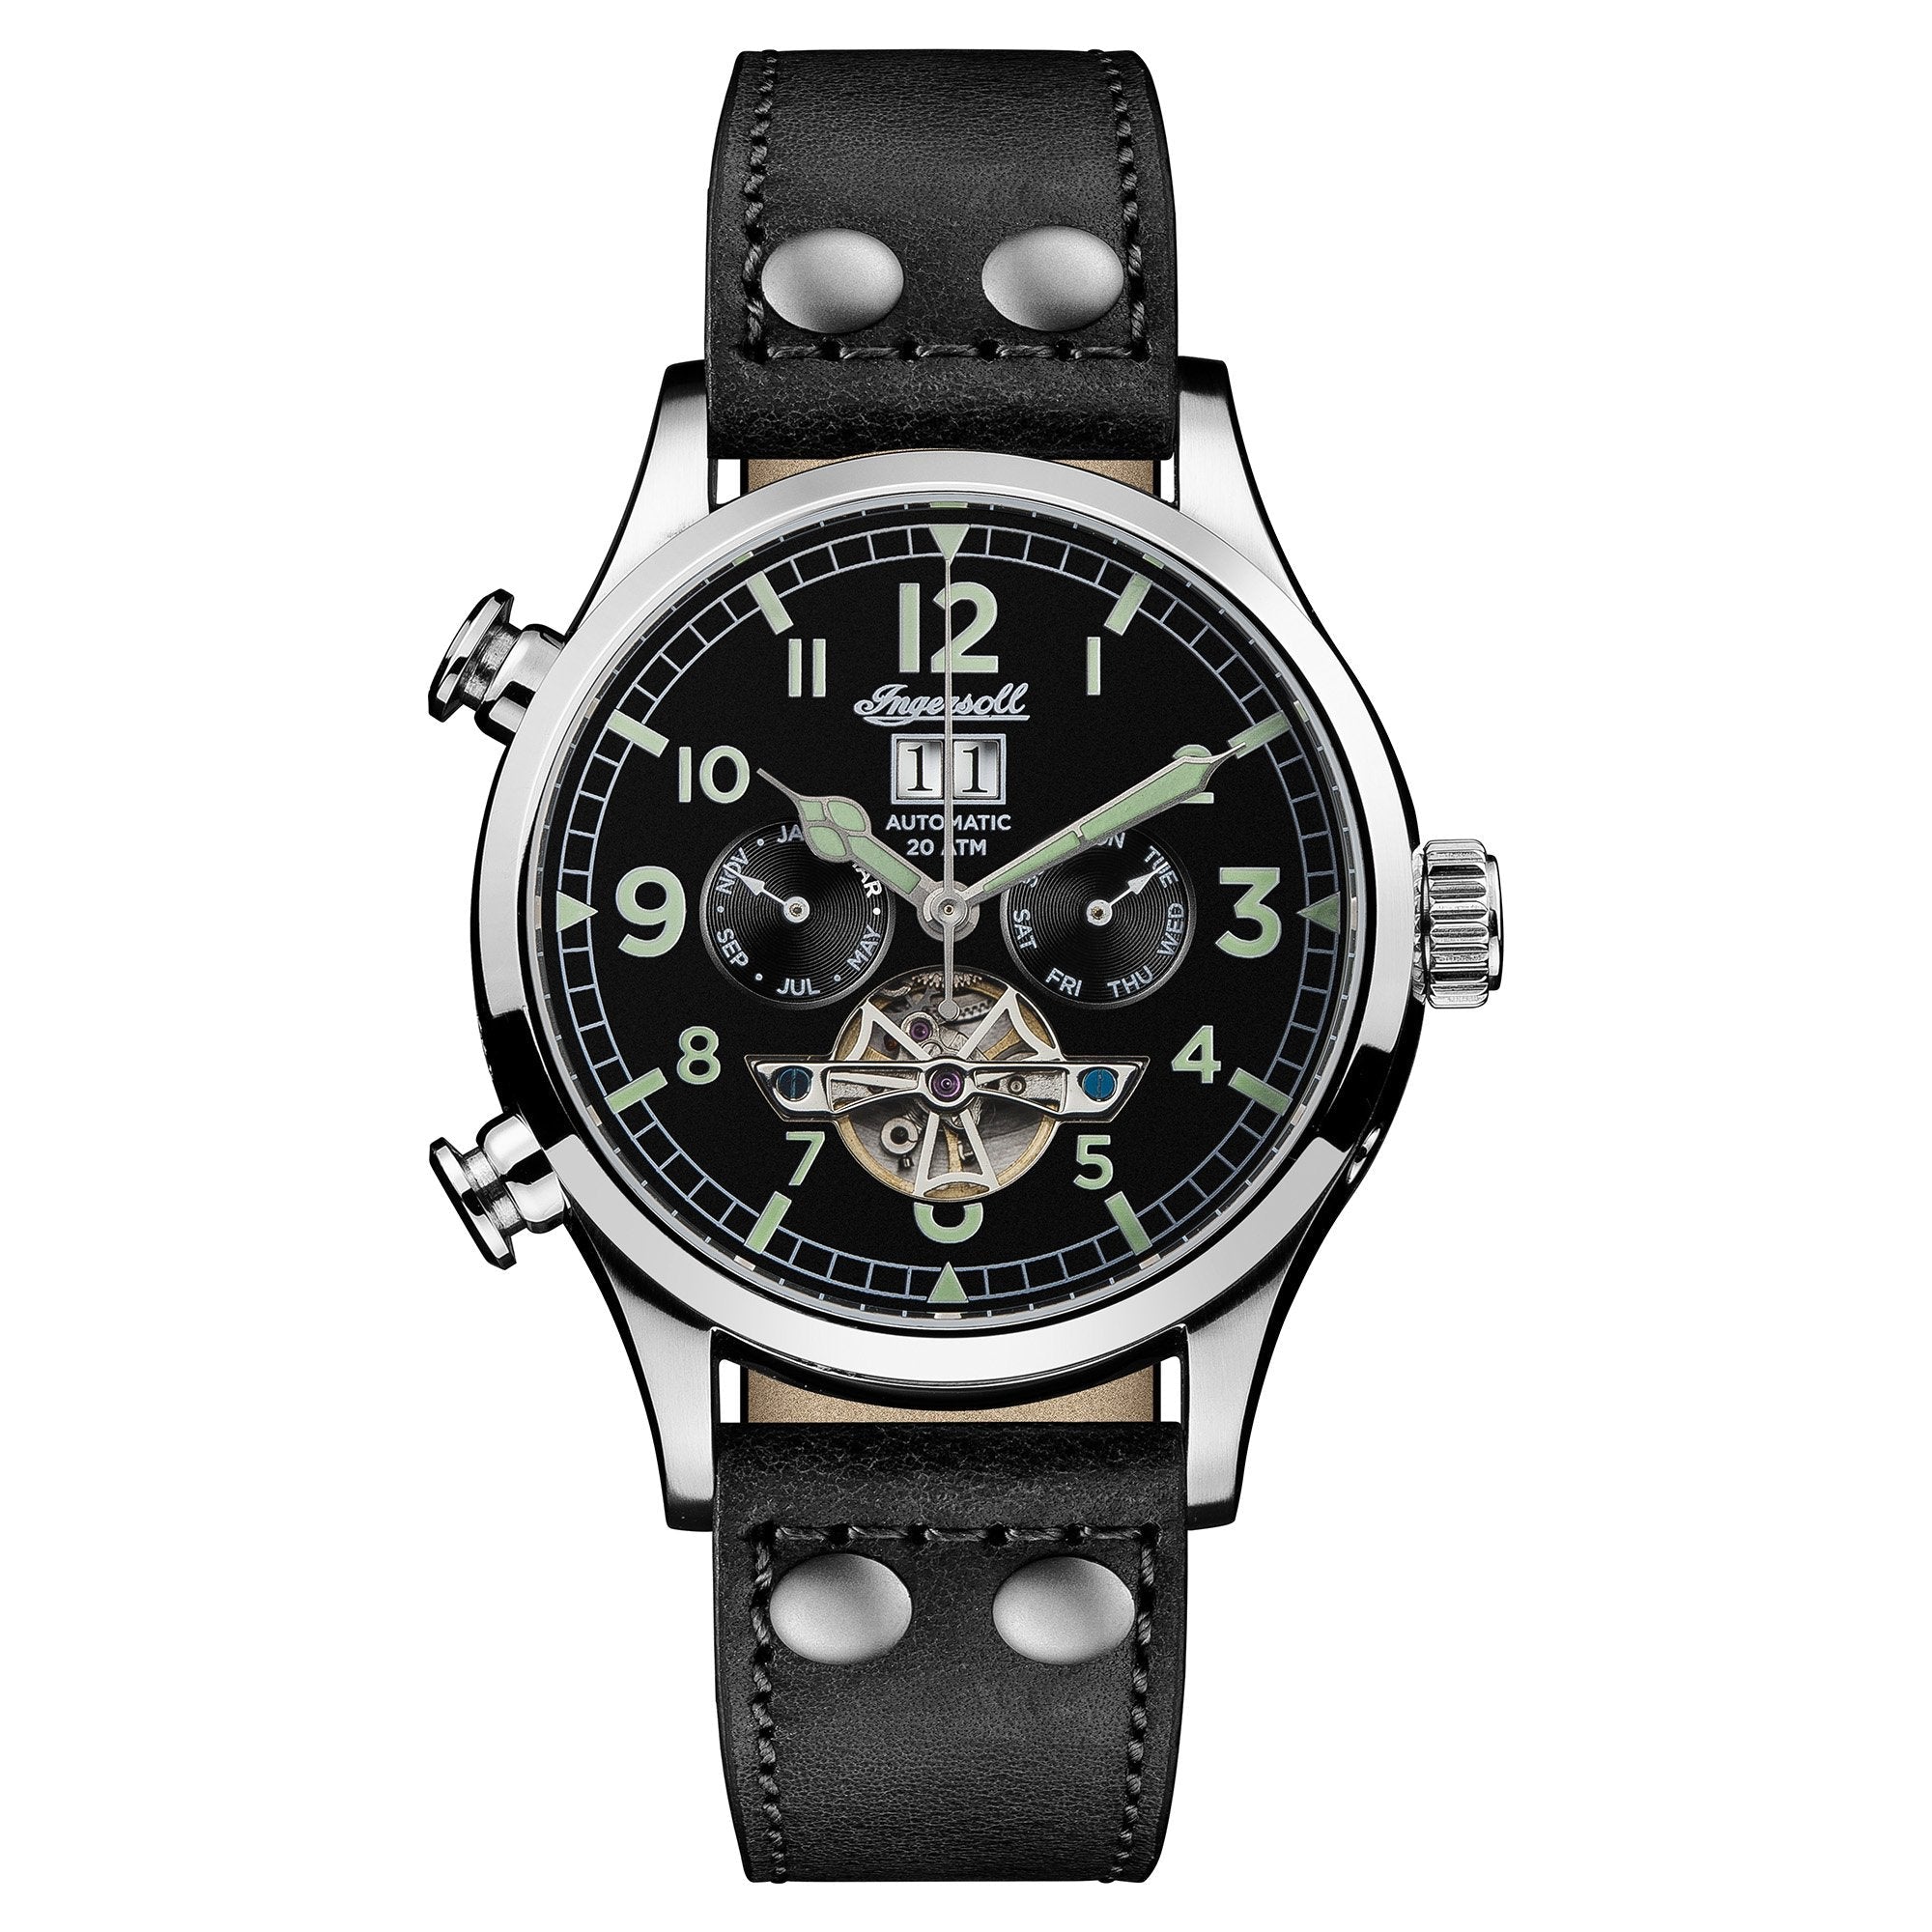 Armstrong Automatic Black Watch